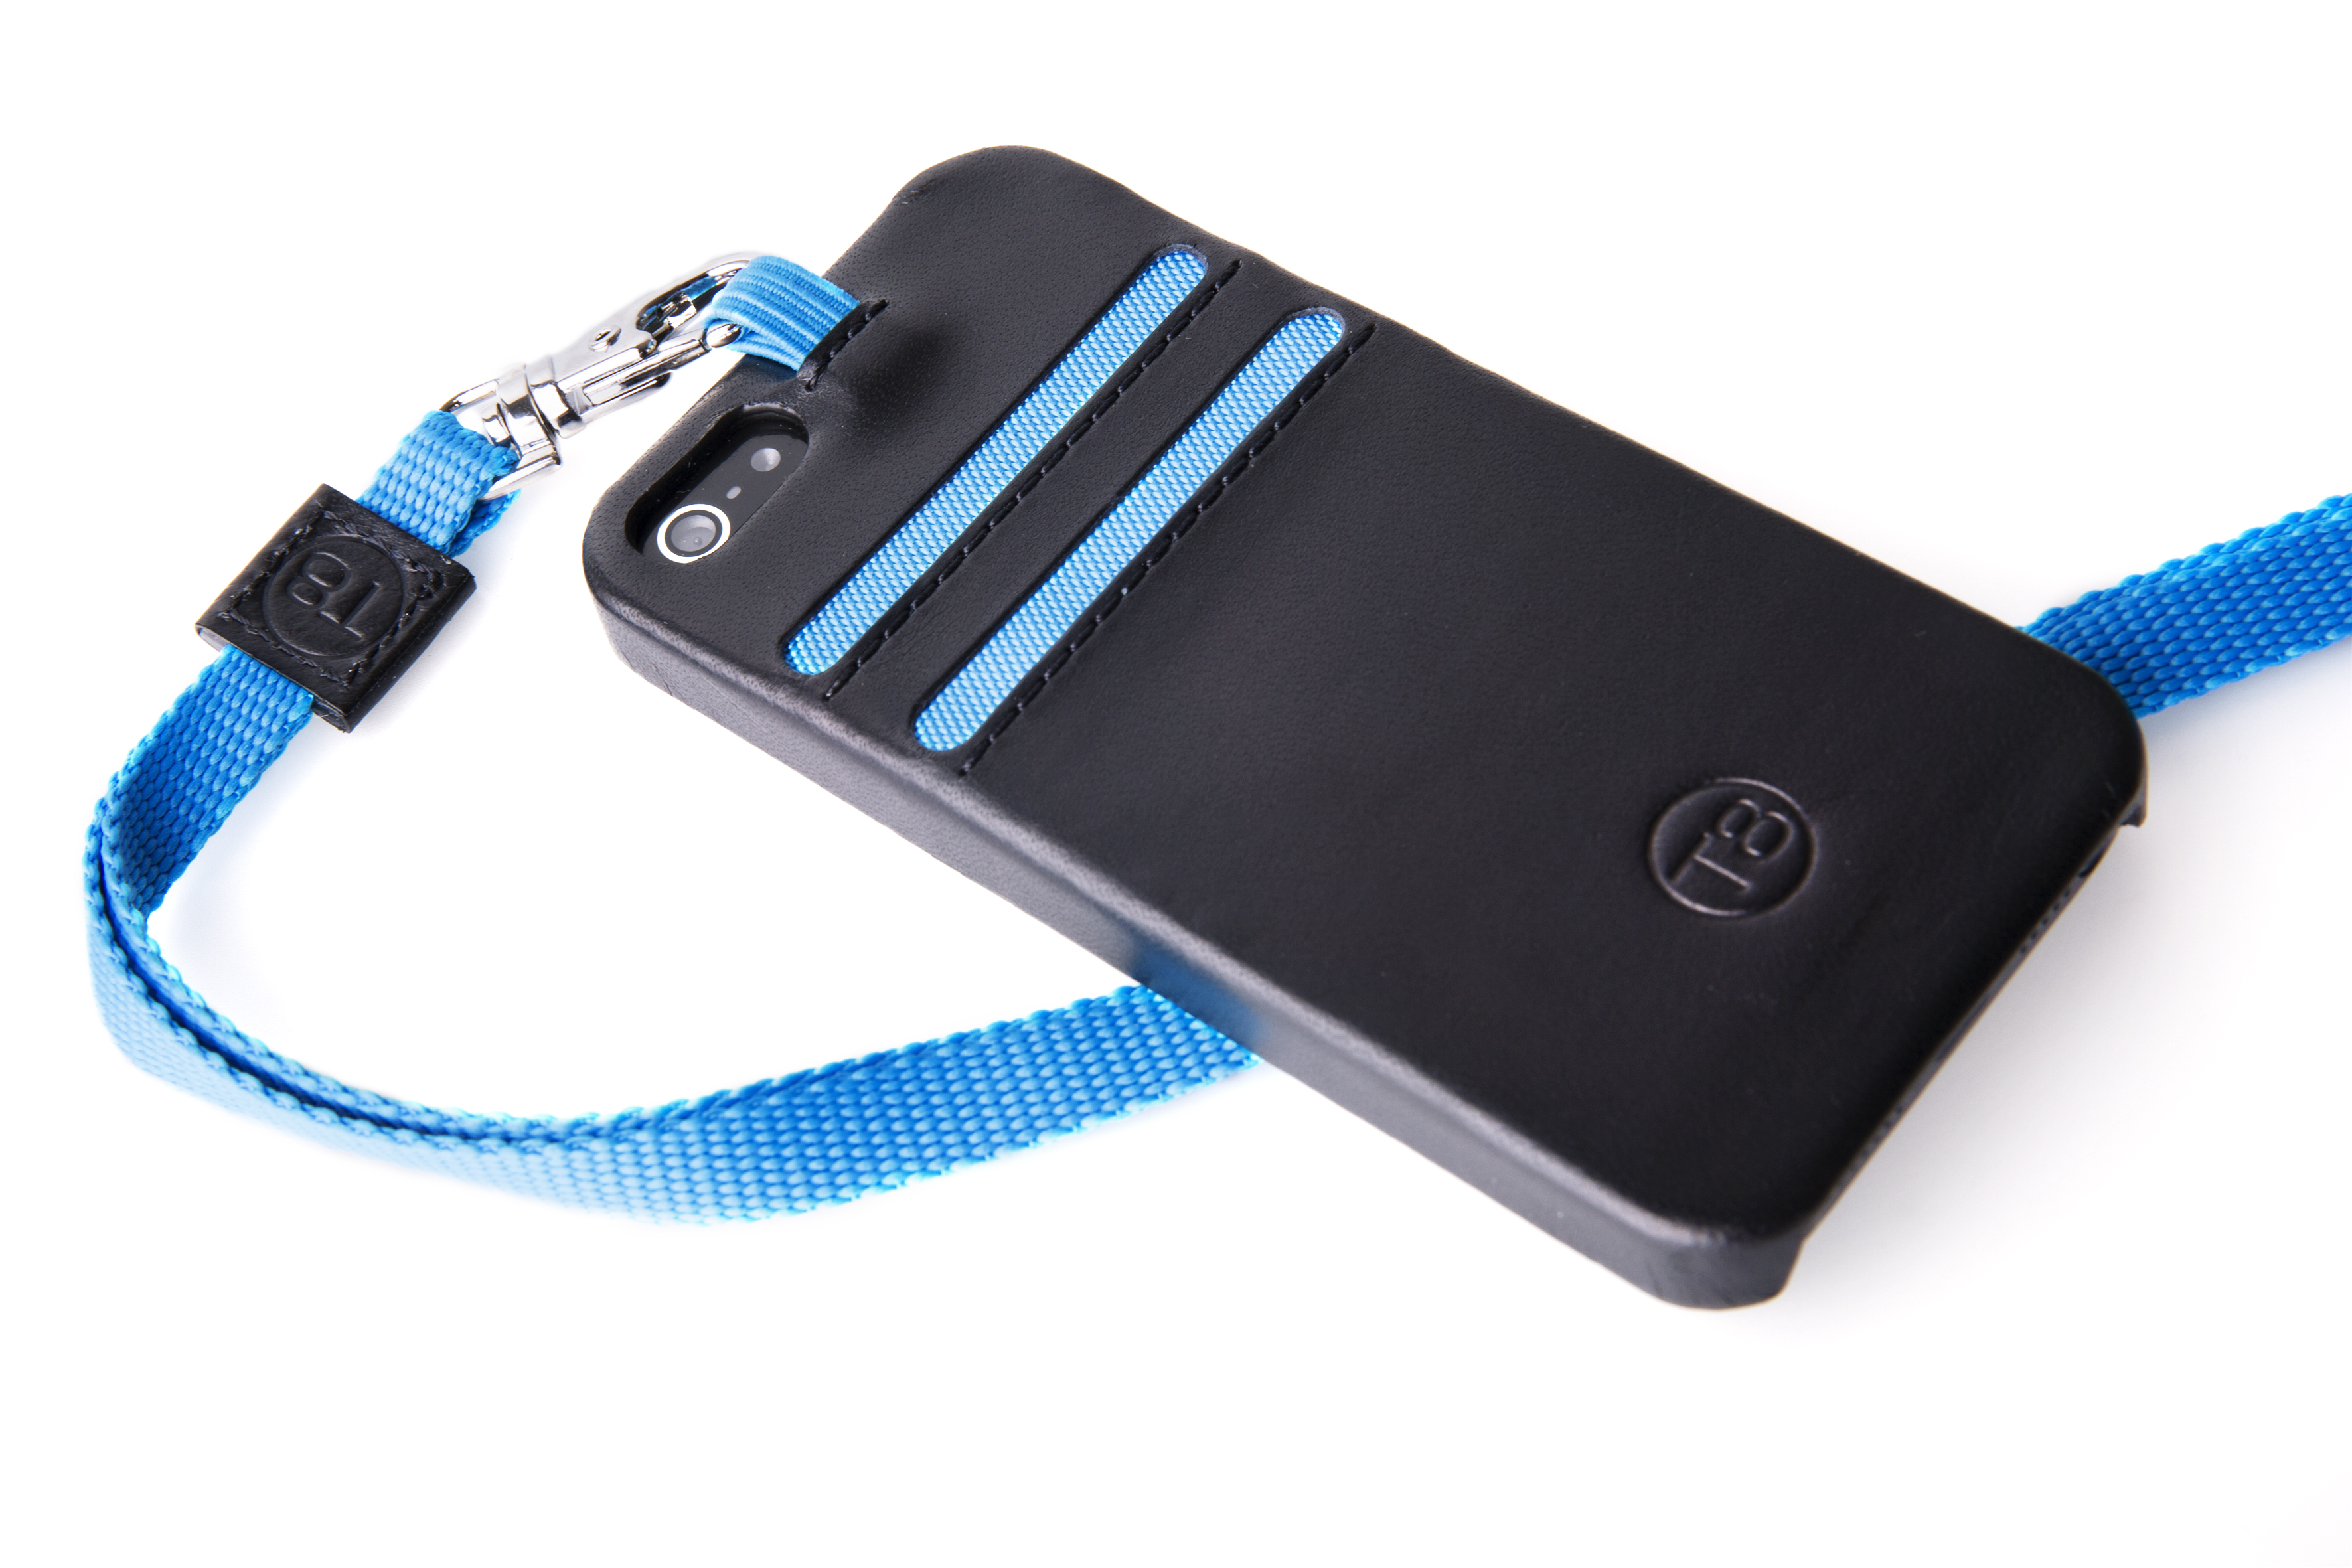 The STORM iPhone 5S wallet case can be worn around the neck when paired with a matching ZEPHYR lanyard.